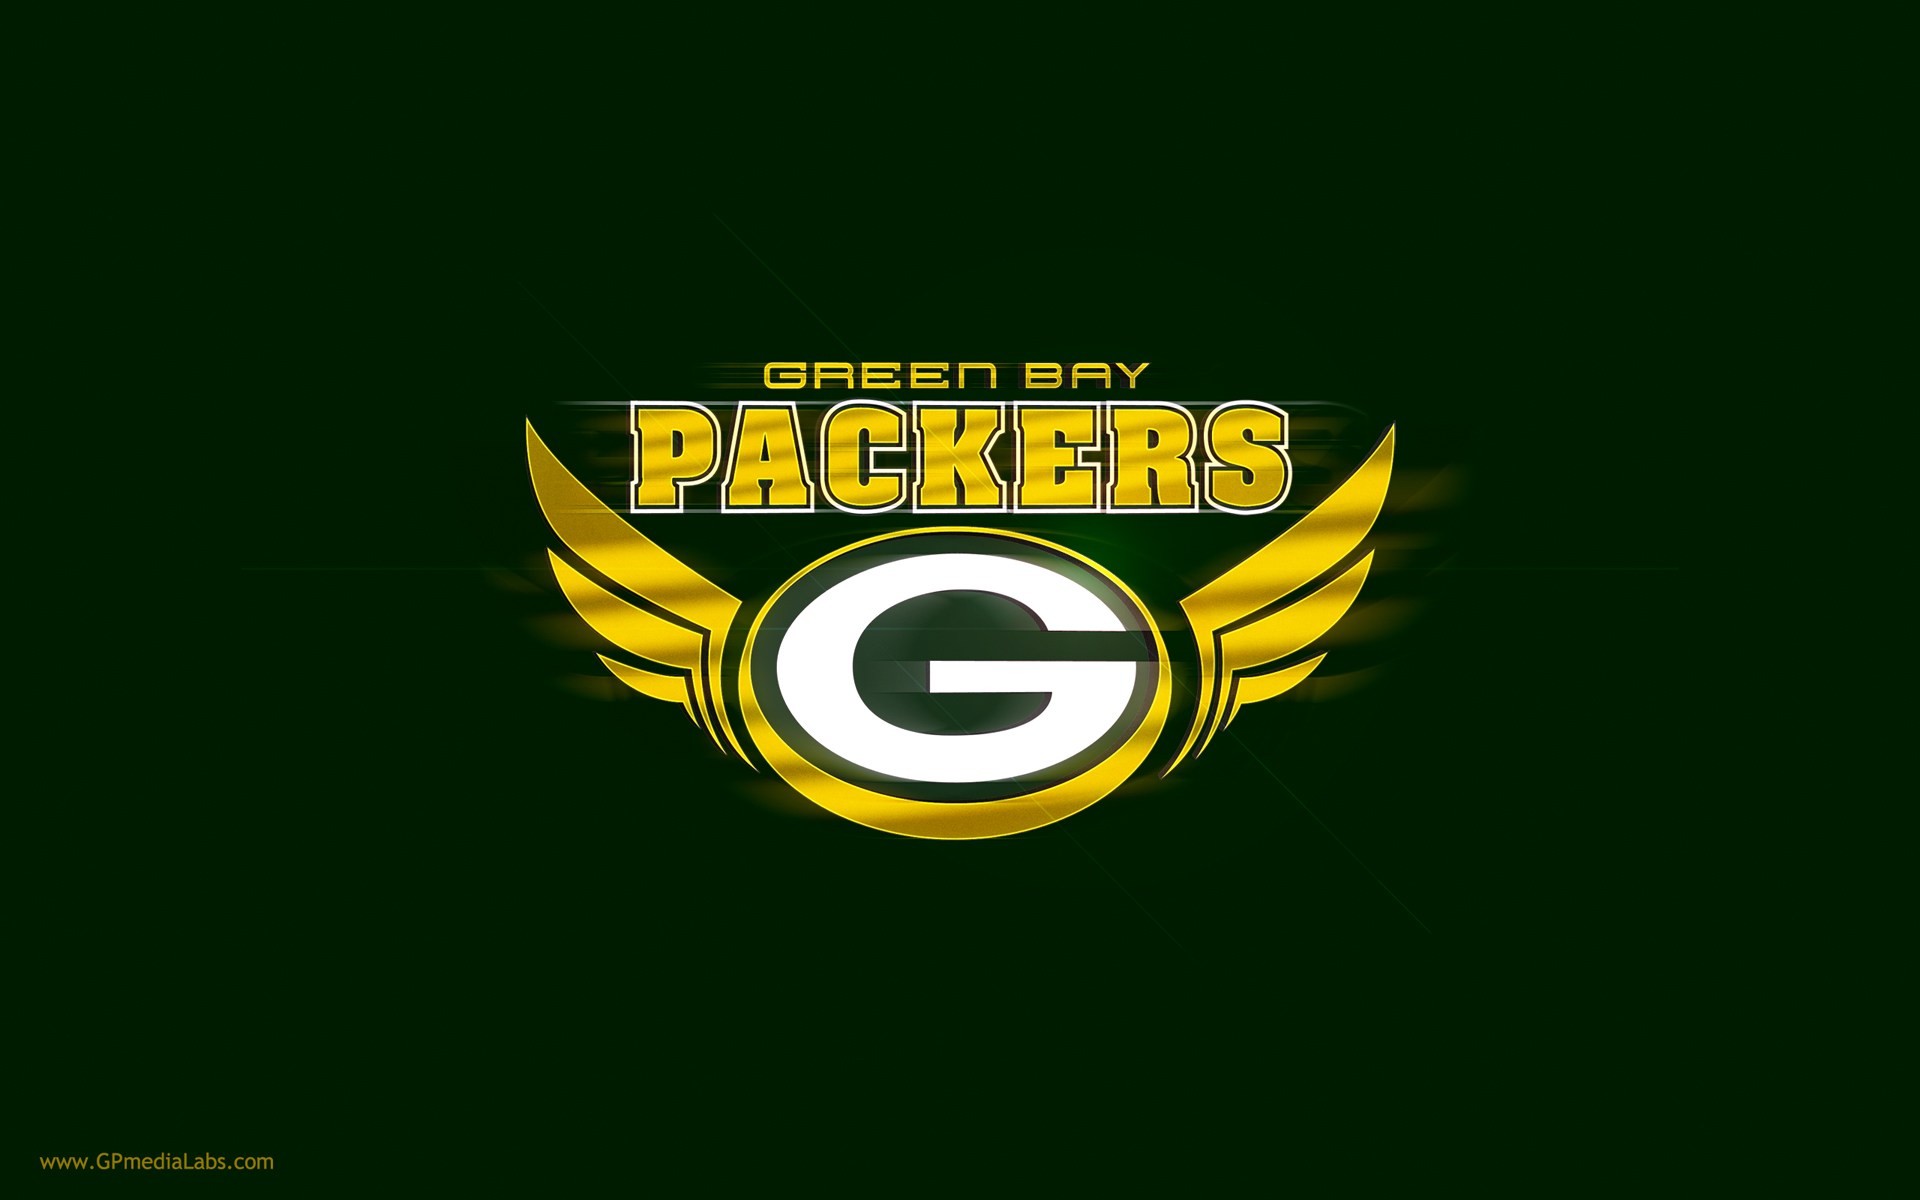 1920x1200 Google Image Result For Http Www Gpmedialabs Com Packers. Green bay packers  iphone wallpaper free ...